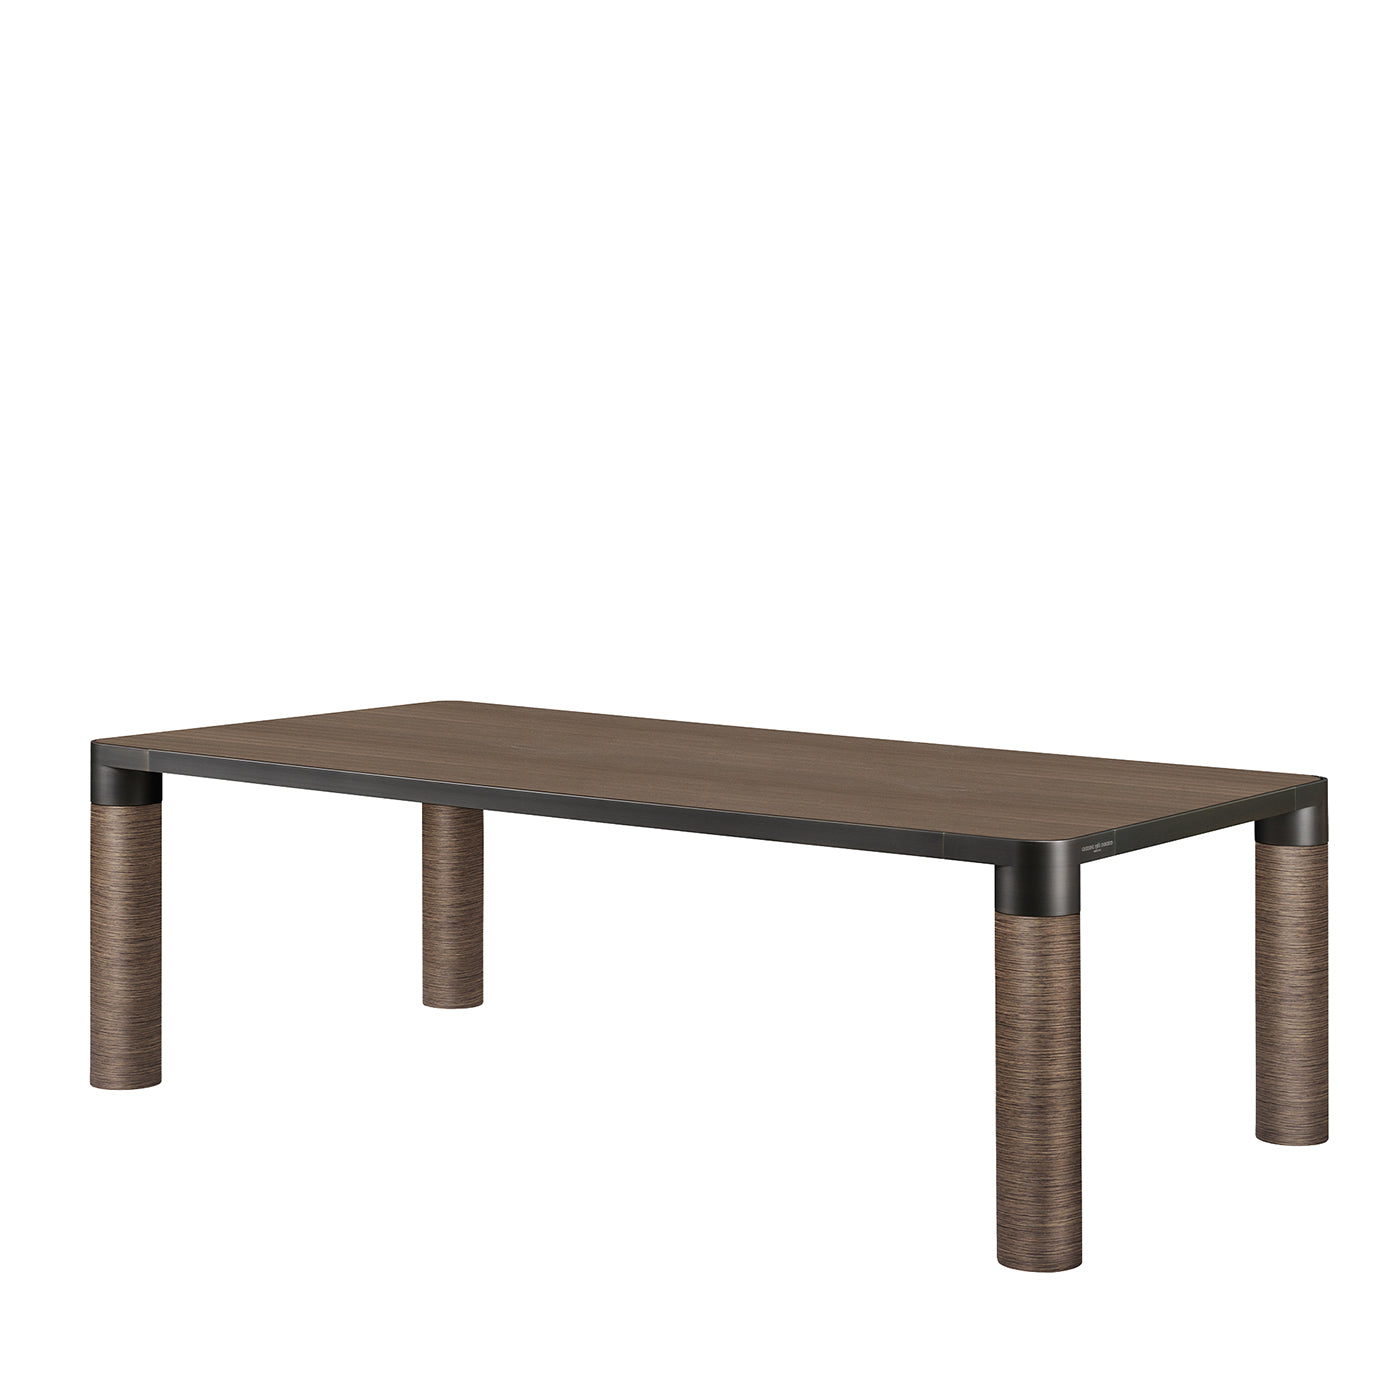 Bold Rectangular Brown Wood Dining Table by Elisa Giovannoni - Alternative view 1